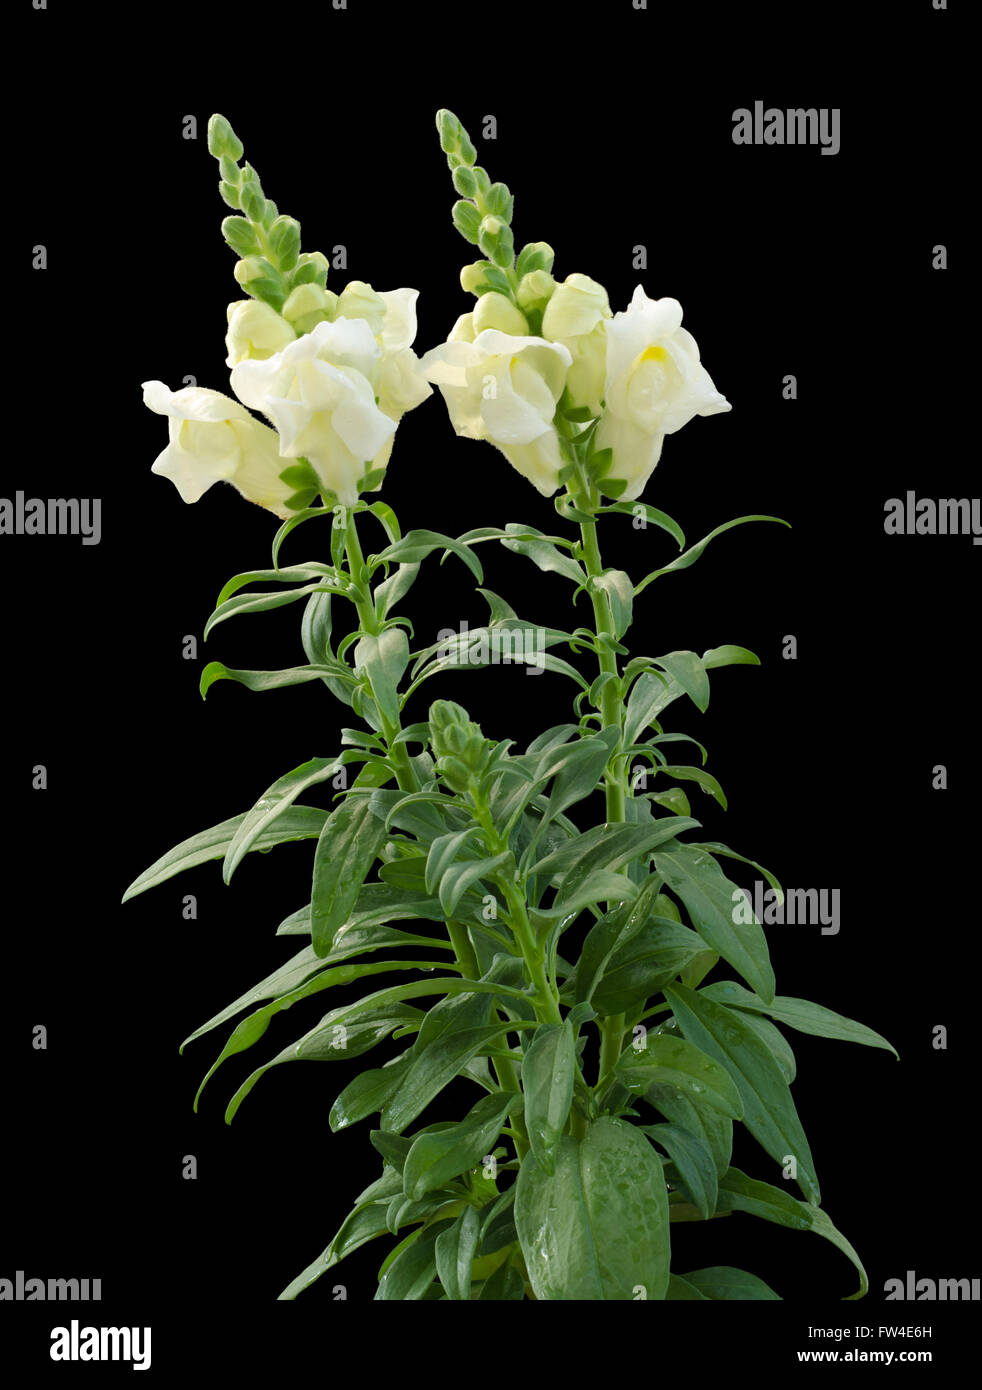 Snapdragon isolated on black background Stock Photo